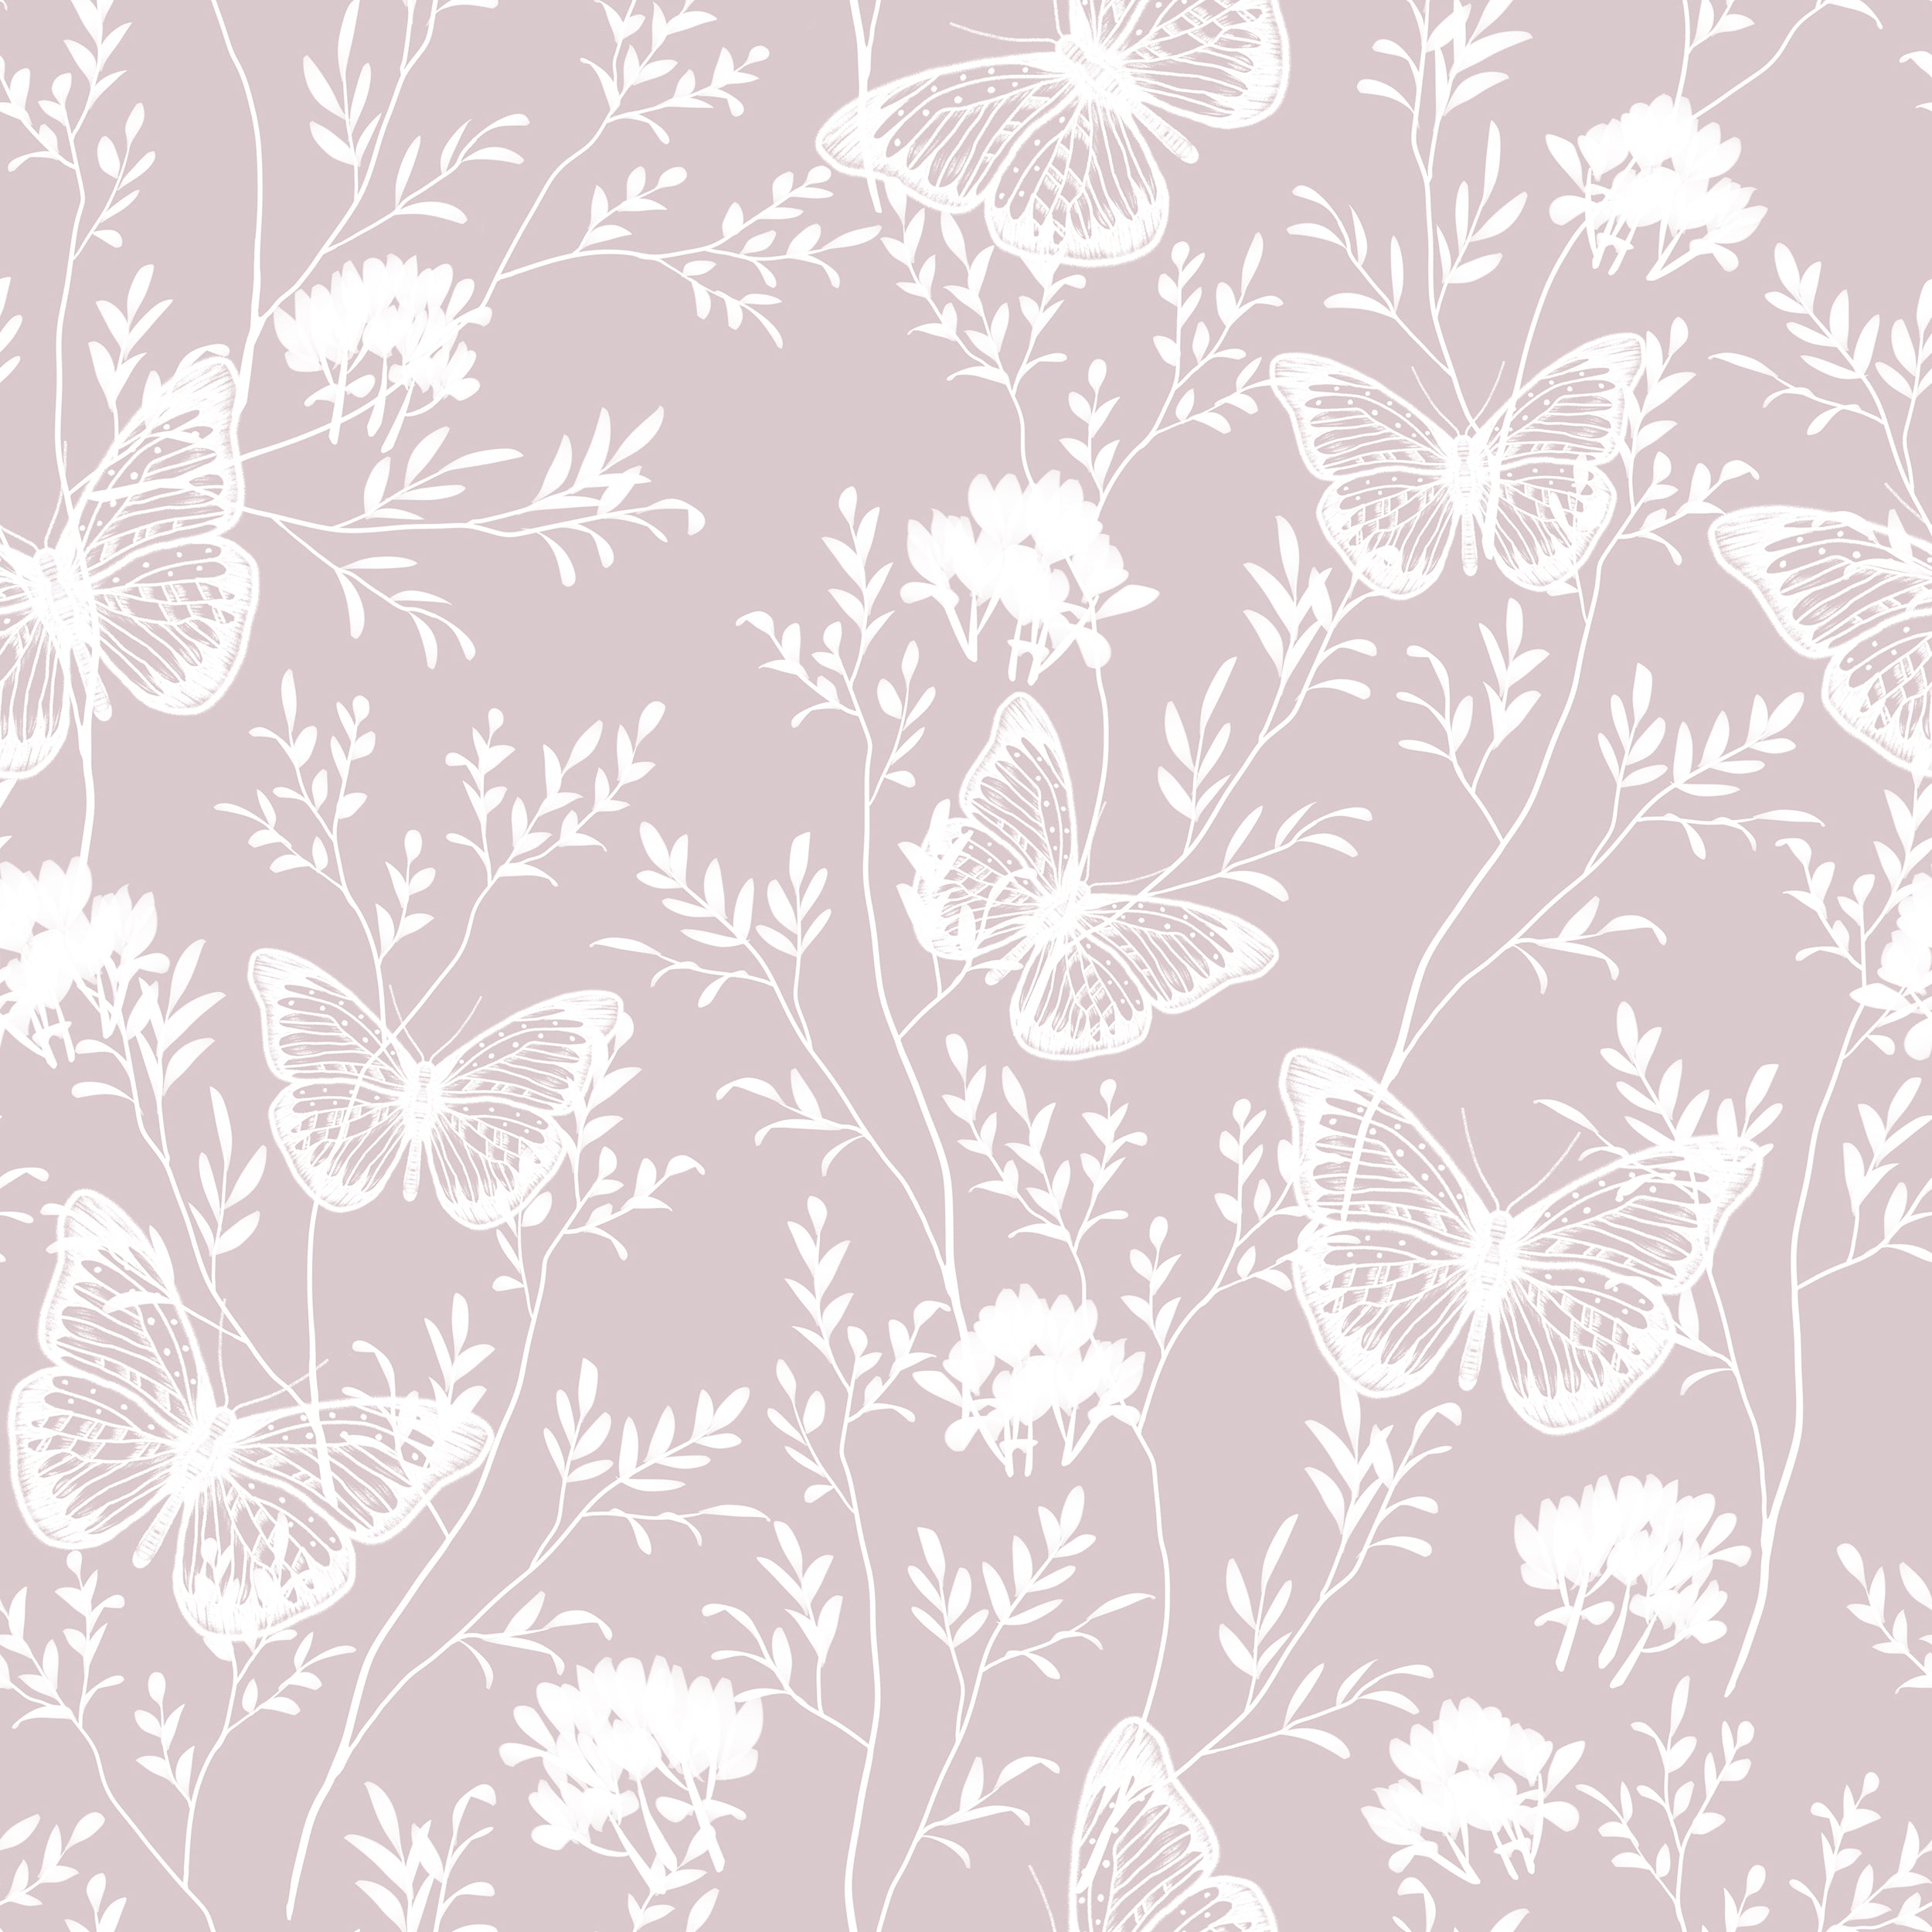 the "Whimsical Wings Wallpaper," partially unrolled to reveal the charming butterfly and floral pattern on a mauve-pink background. This image showcases the wallpaper's pattern continuity and the romantic, soft ambiance it's designed to create.